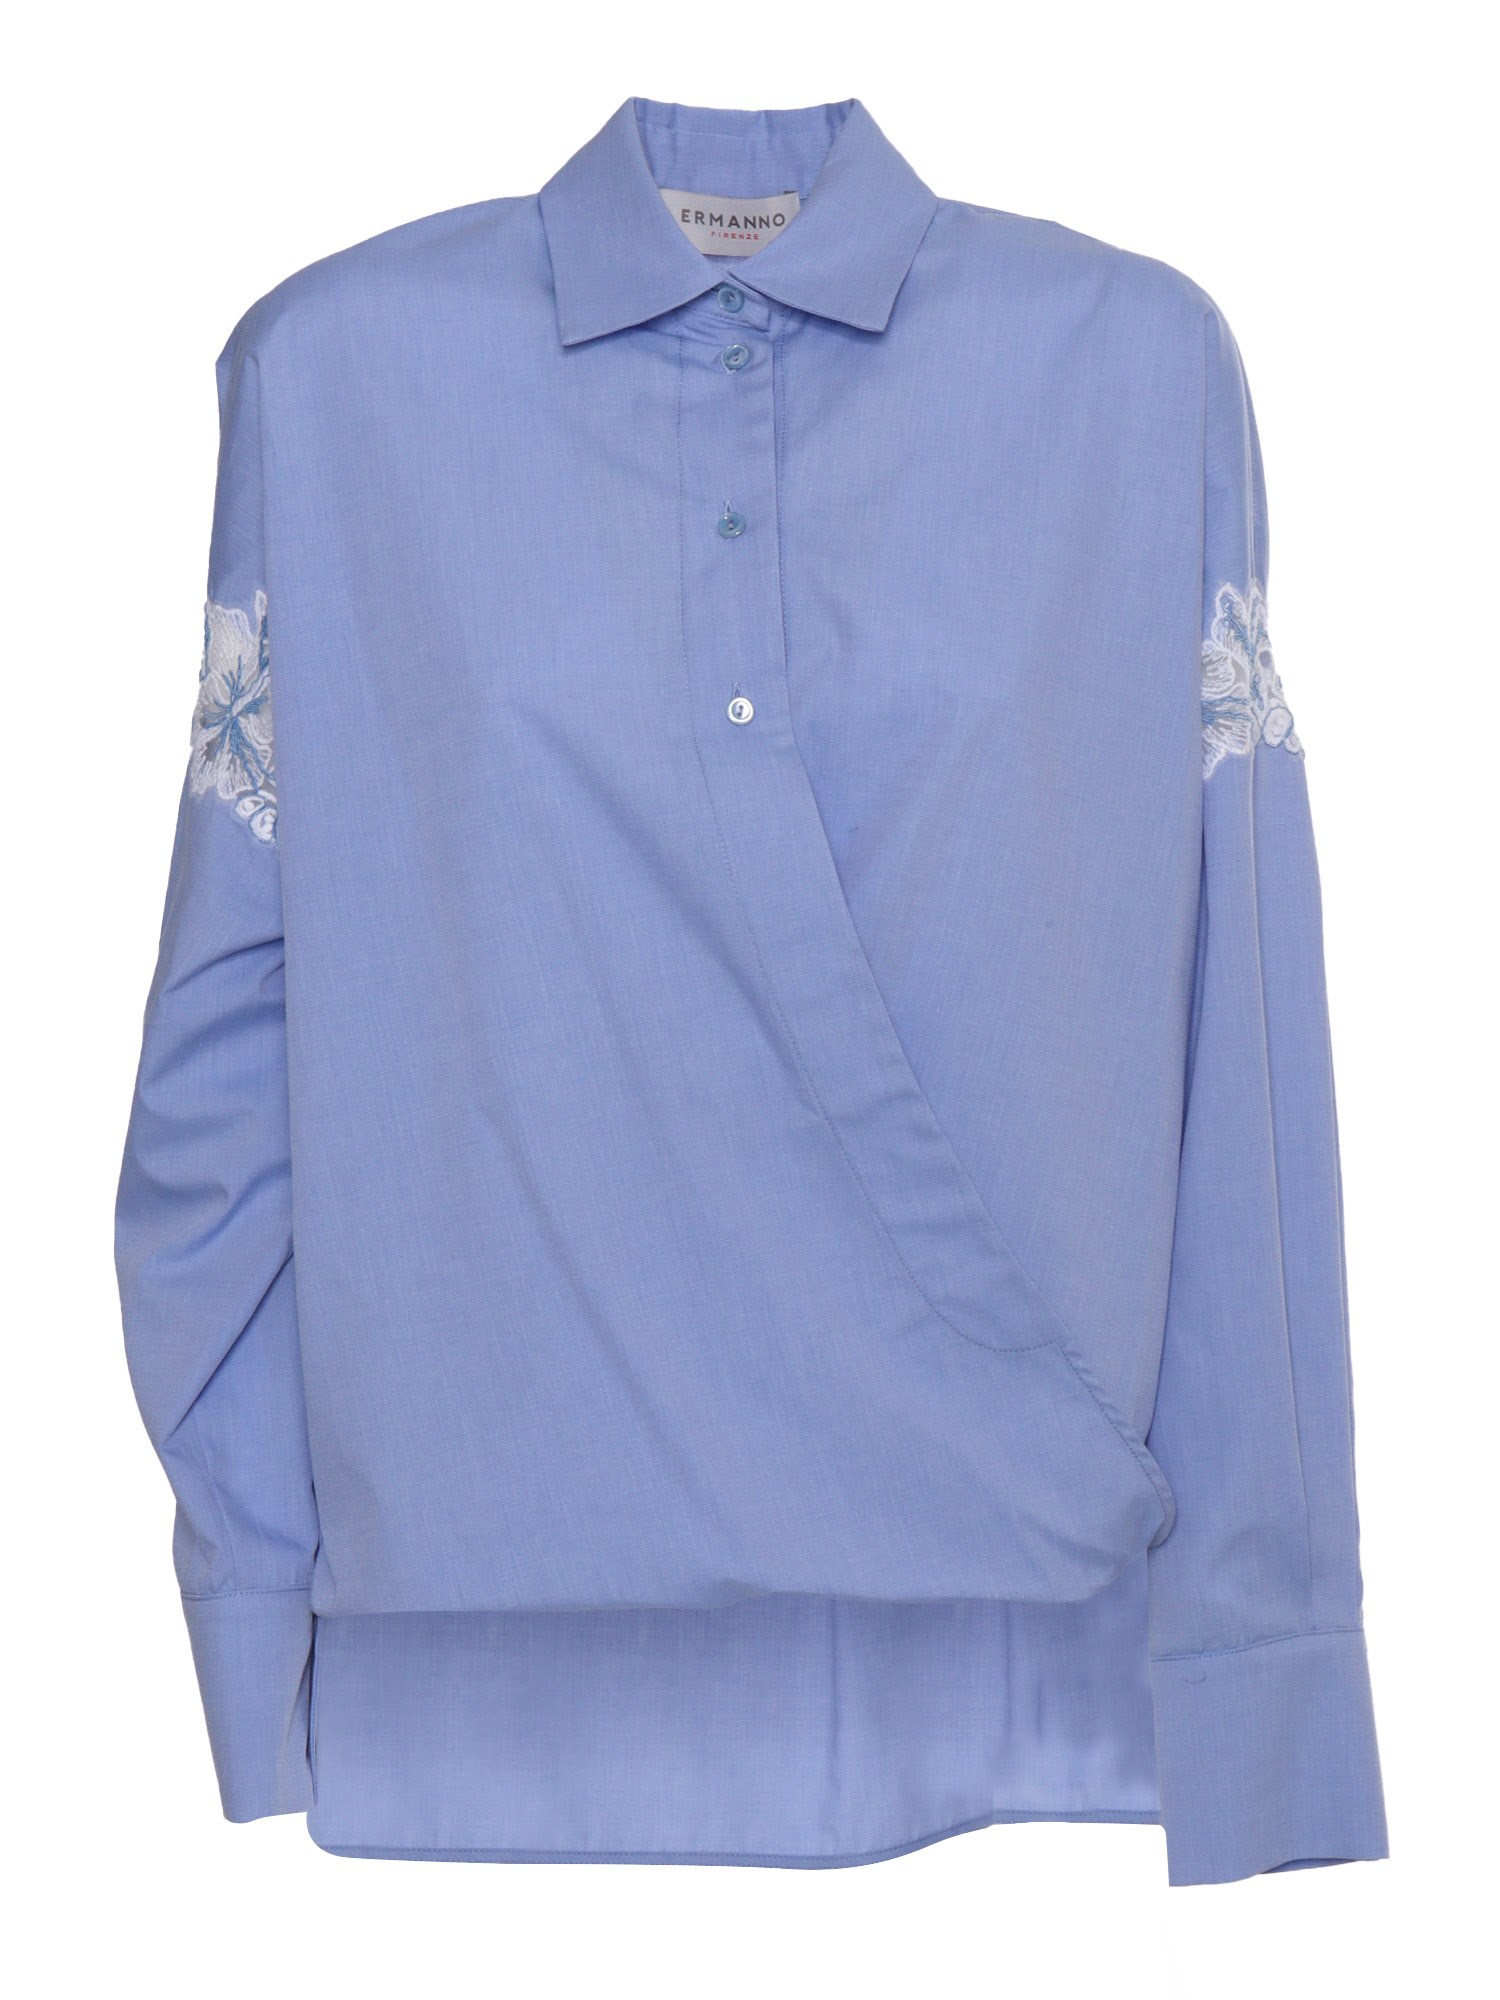 Ermanno Firenze Light Blue Shirt With Lace